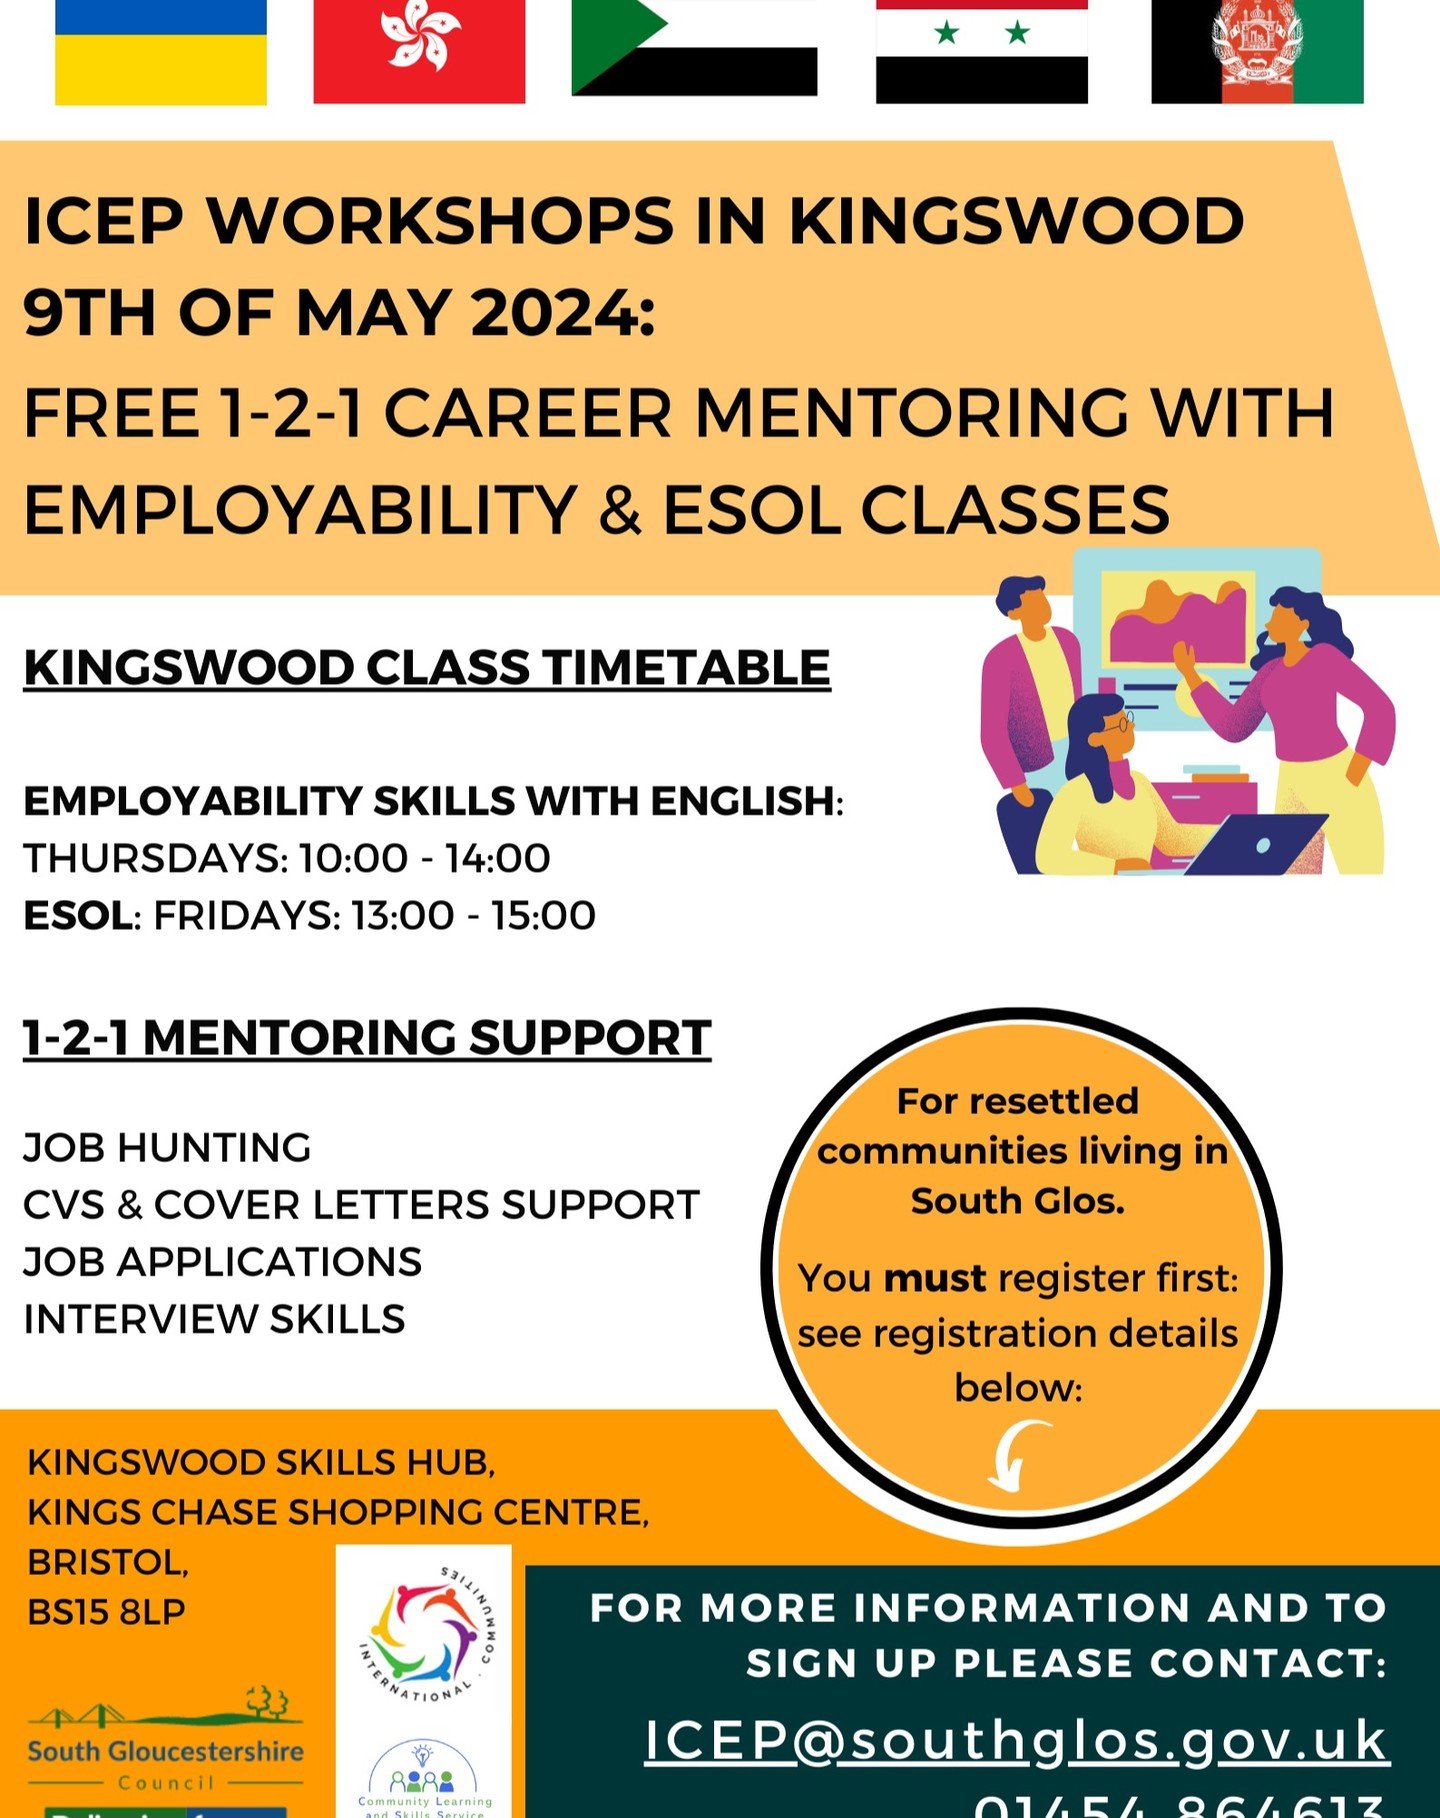 Our International Communities Employment Programme is running a new set of ESOL and Employability classes in Kingswood starting in May. Email ICEP@southglos.gov.uk to express your interest.